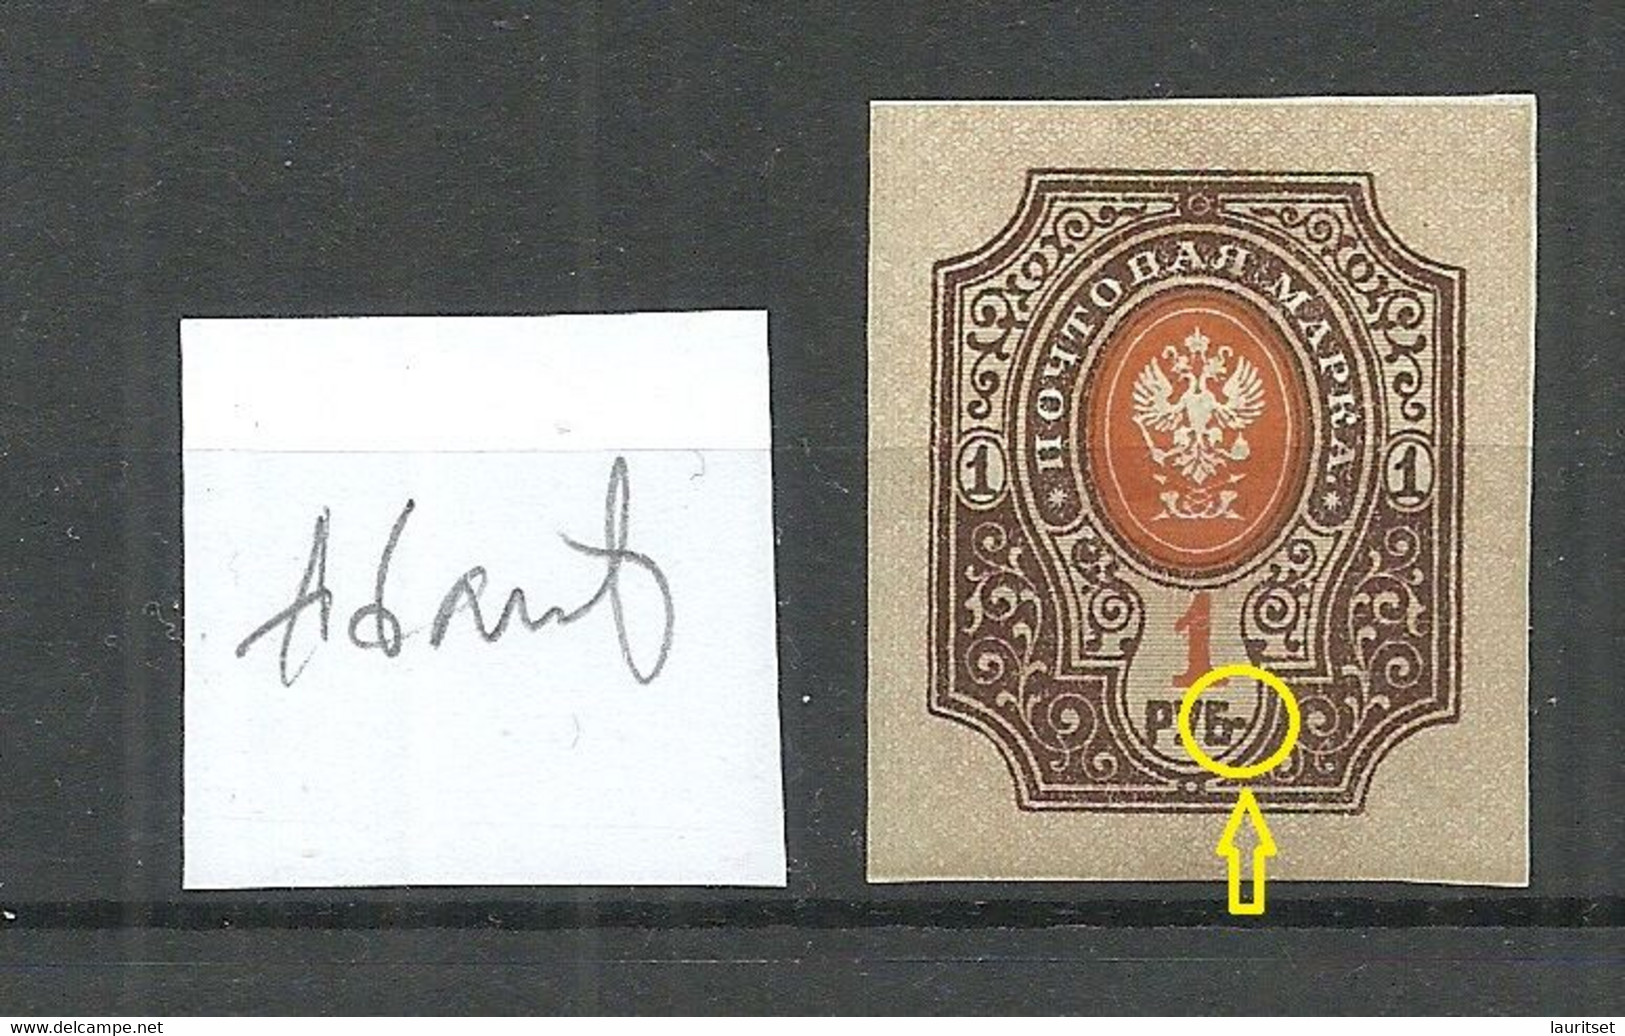 RUSSLAND RUSSIA 1919 Michel 77 B MNH Error Perforation Variety Abart = Brown Spot In Stamp Printing Color After PUB - Variedades & Curiosidades